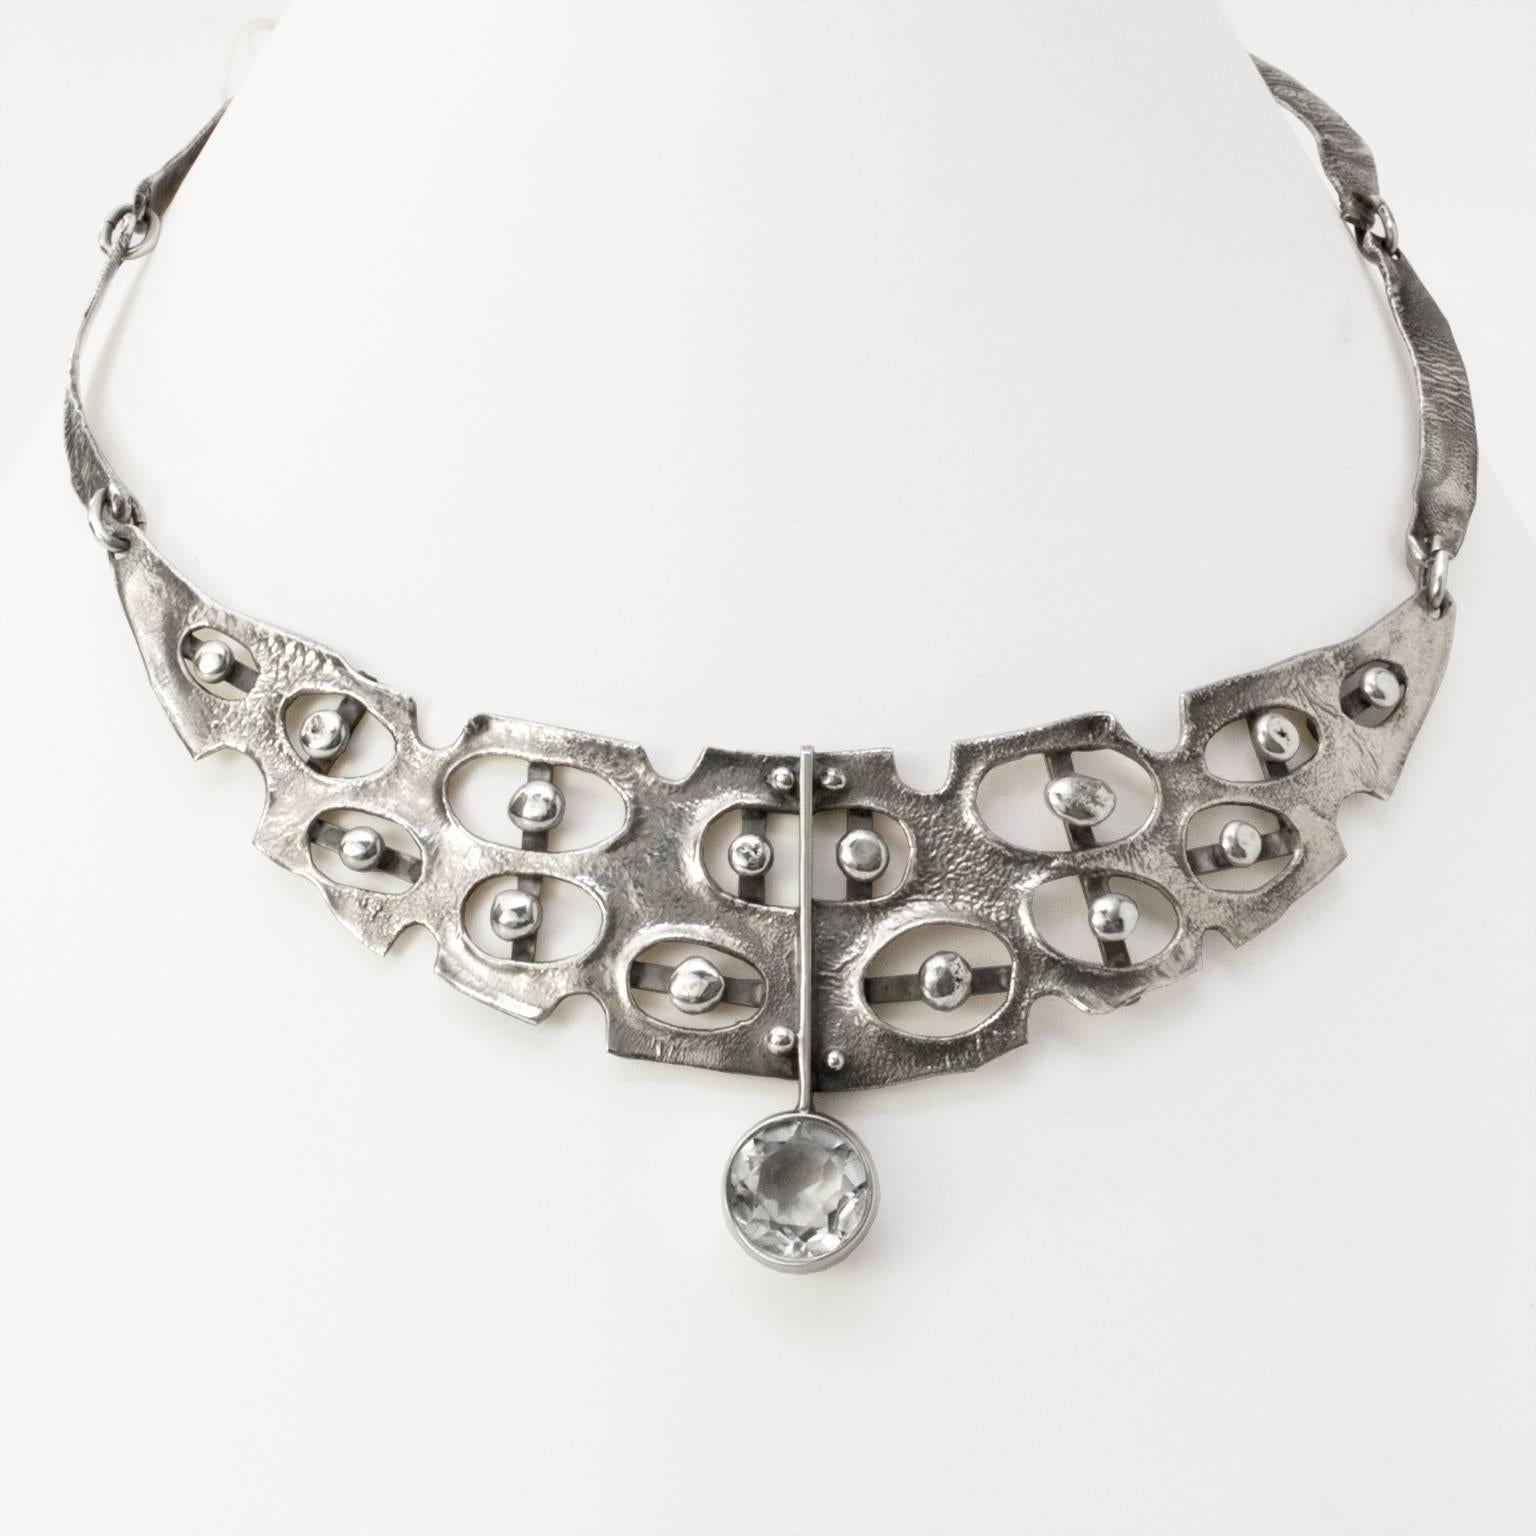 Scandinavian Modern sterling silver necklace with highly textured surface and organic shaped openings. A round faceted quartz crystal adds a geometric detail. Designed by Isaac Cohen, Stockholm, 1965
Diameter: 6